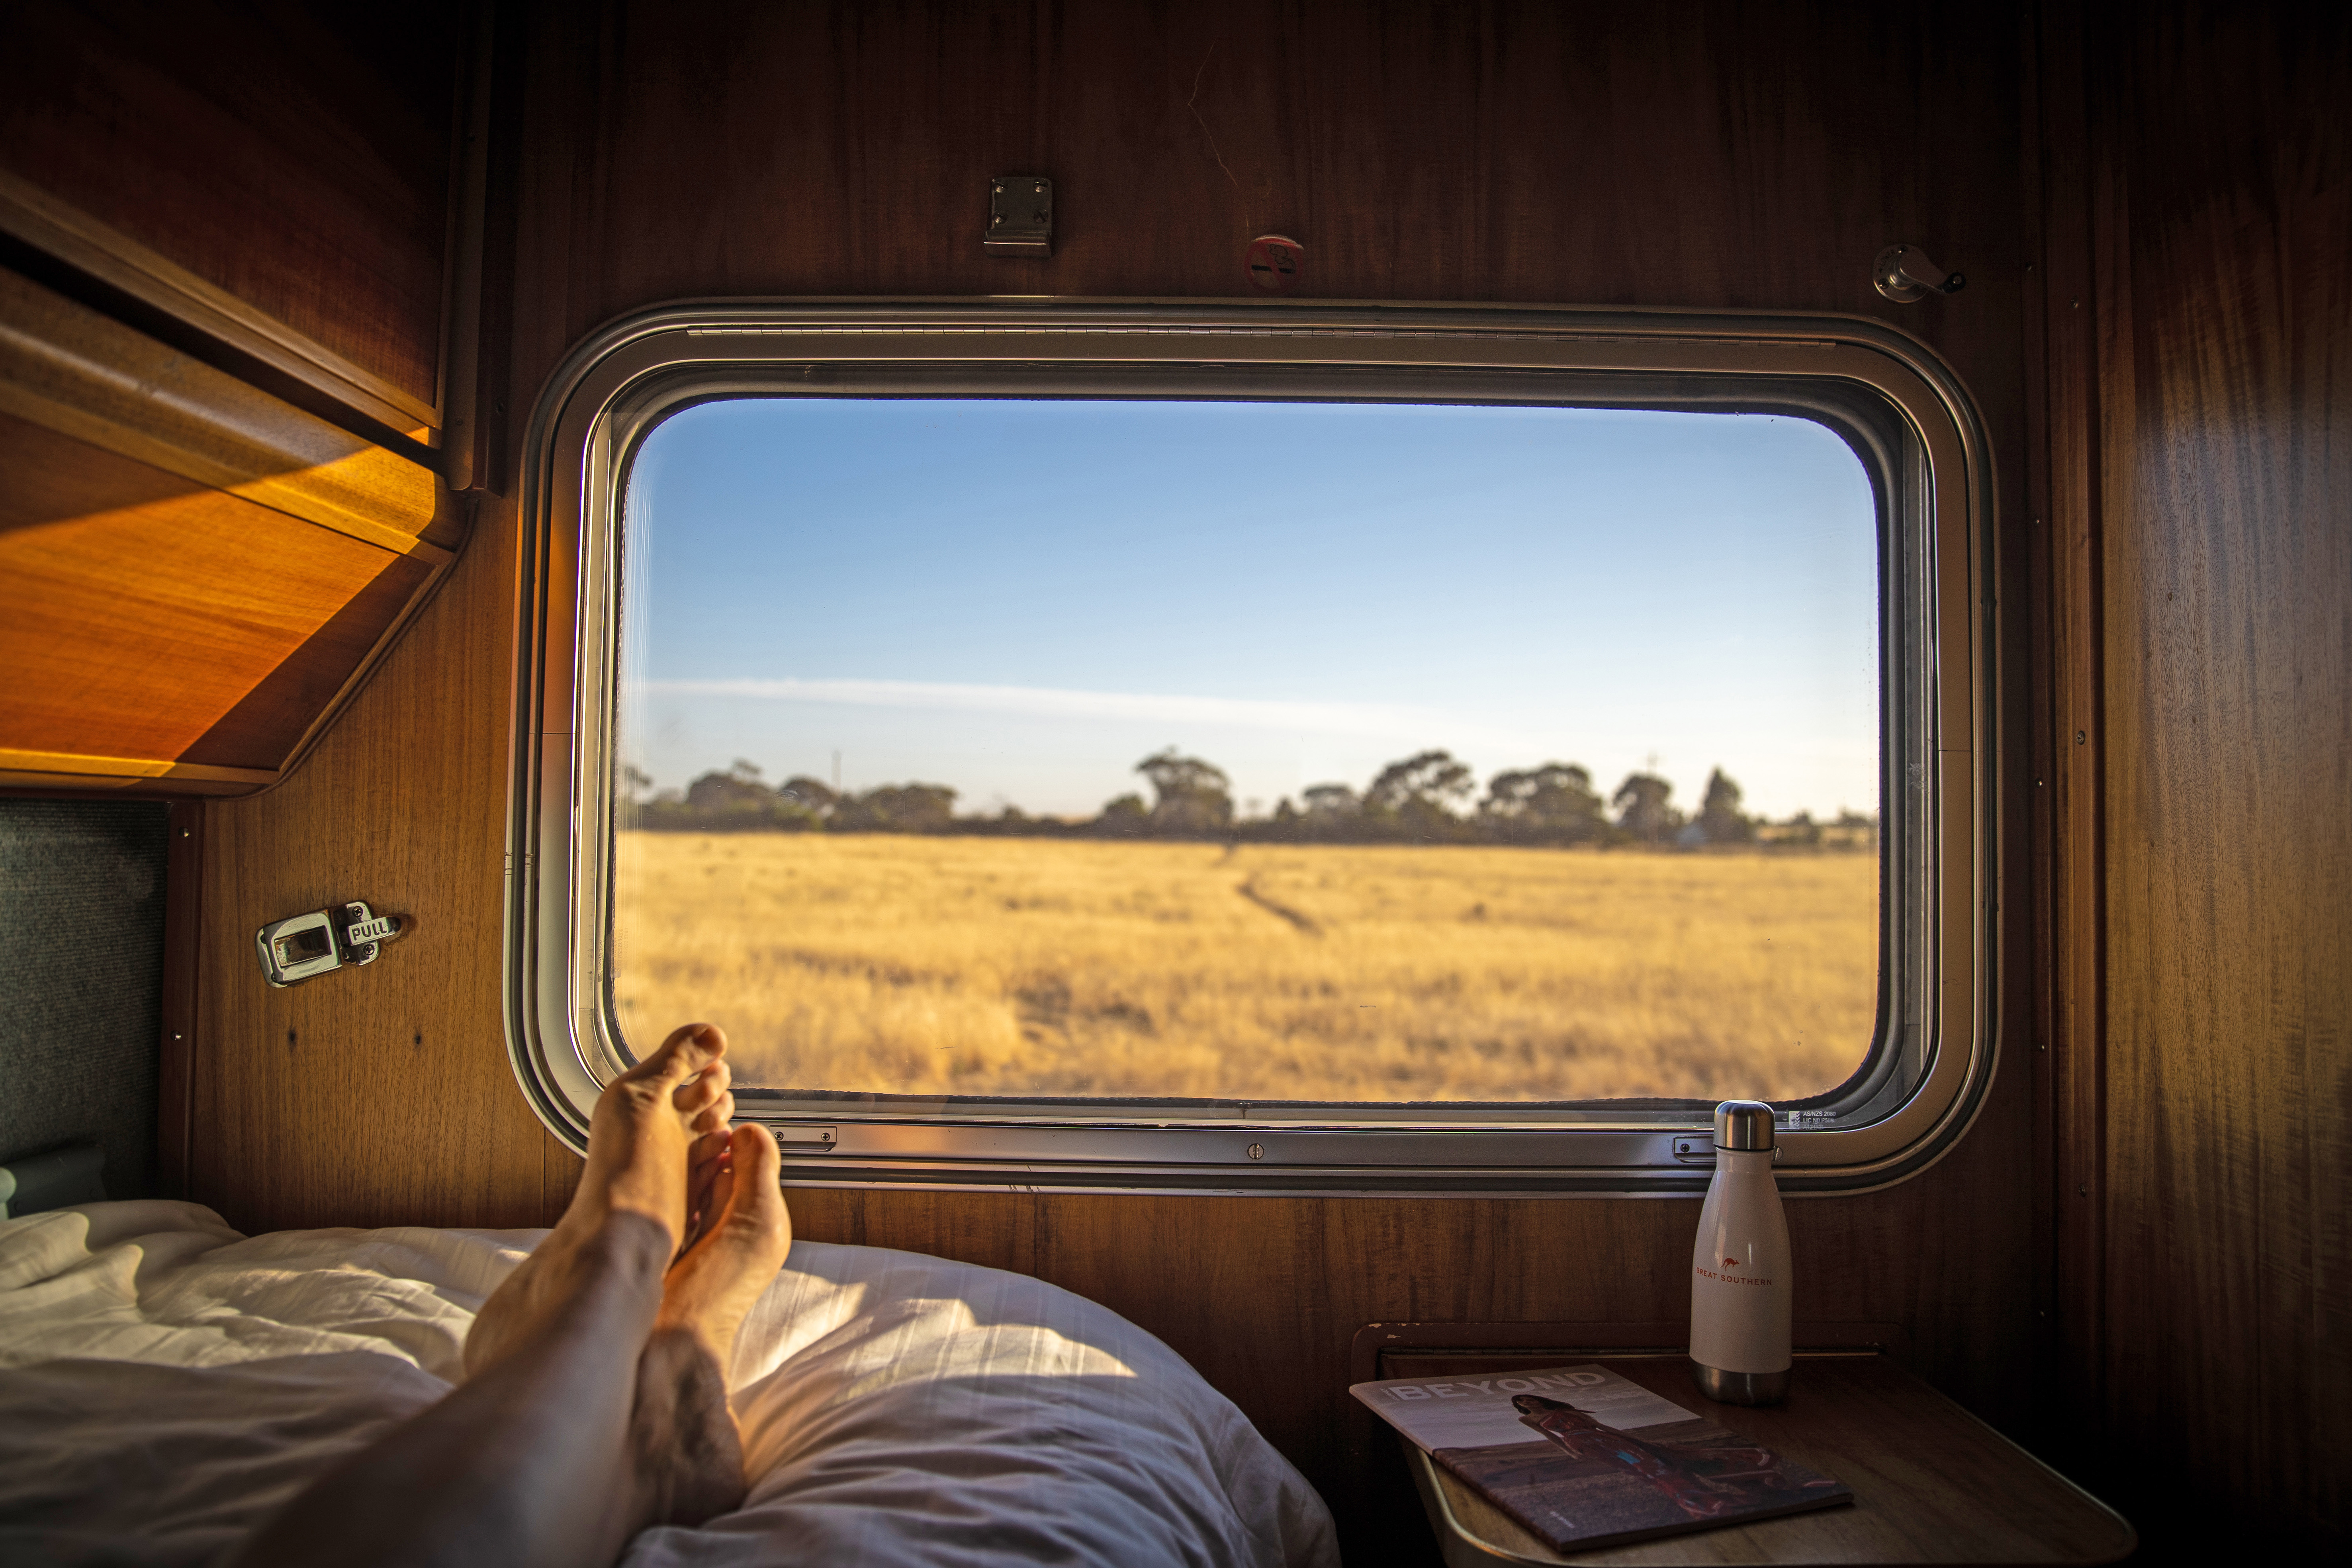 Sleeper Trains Unveiled: Pros and Cons of Overnight Train Travel